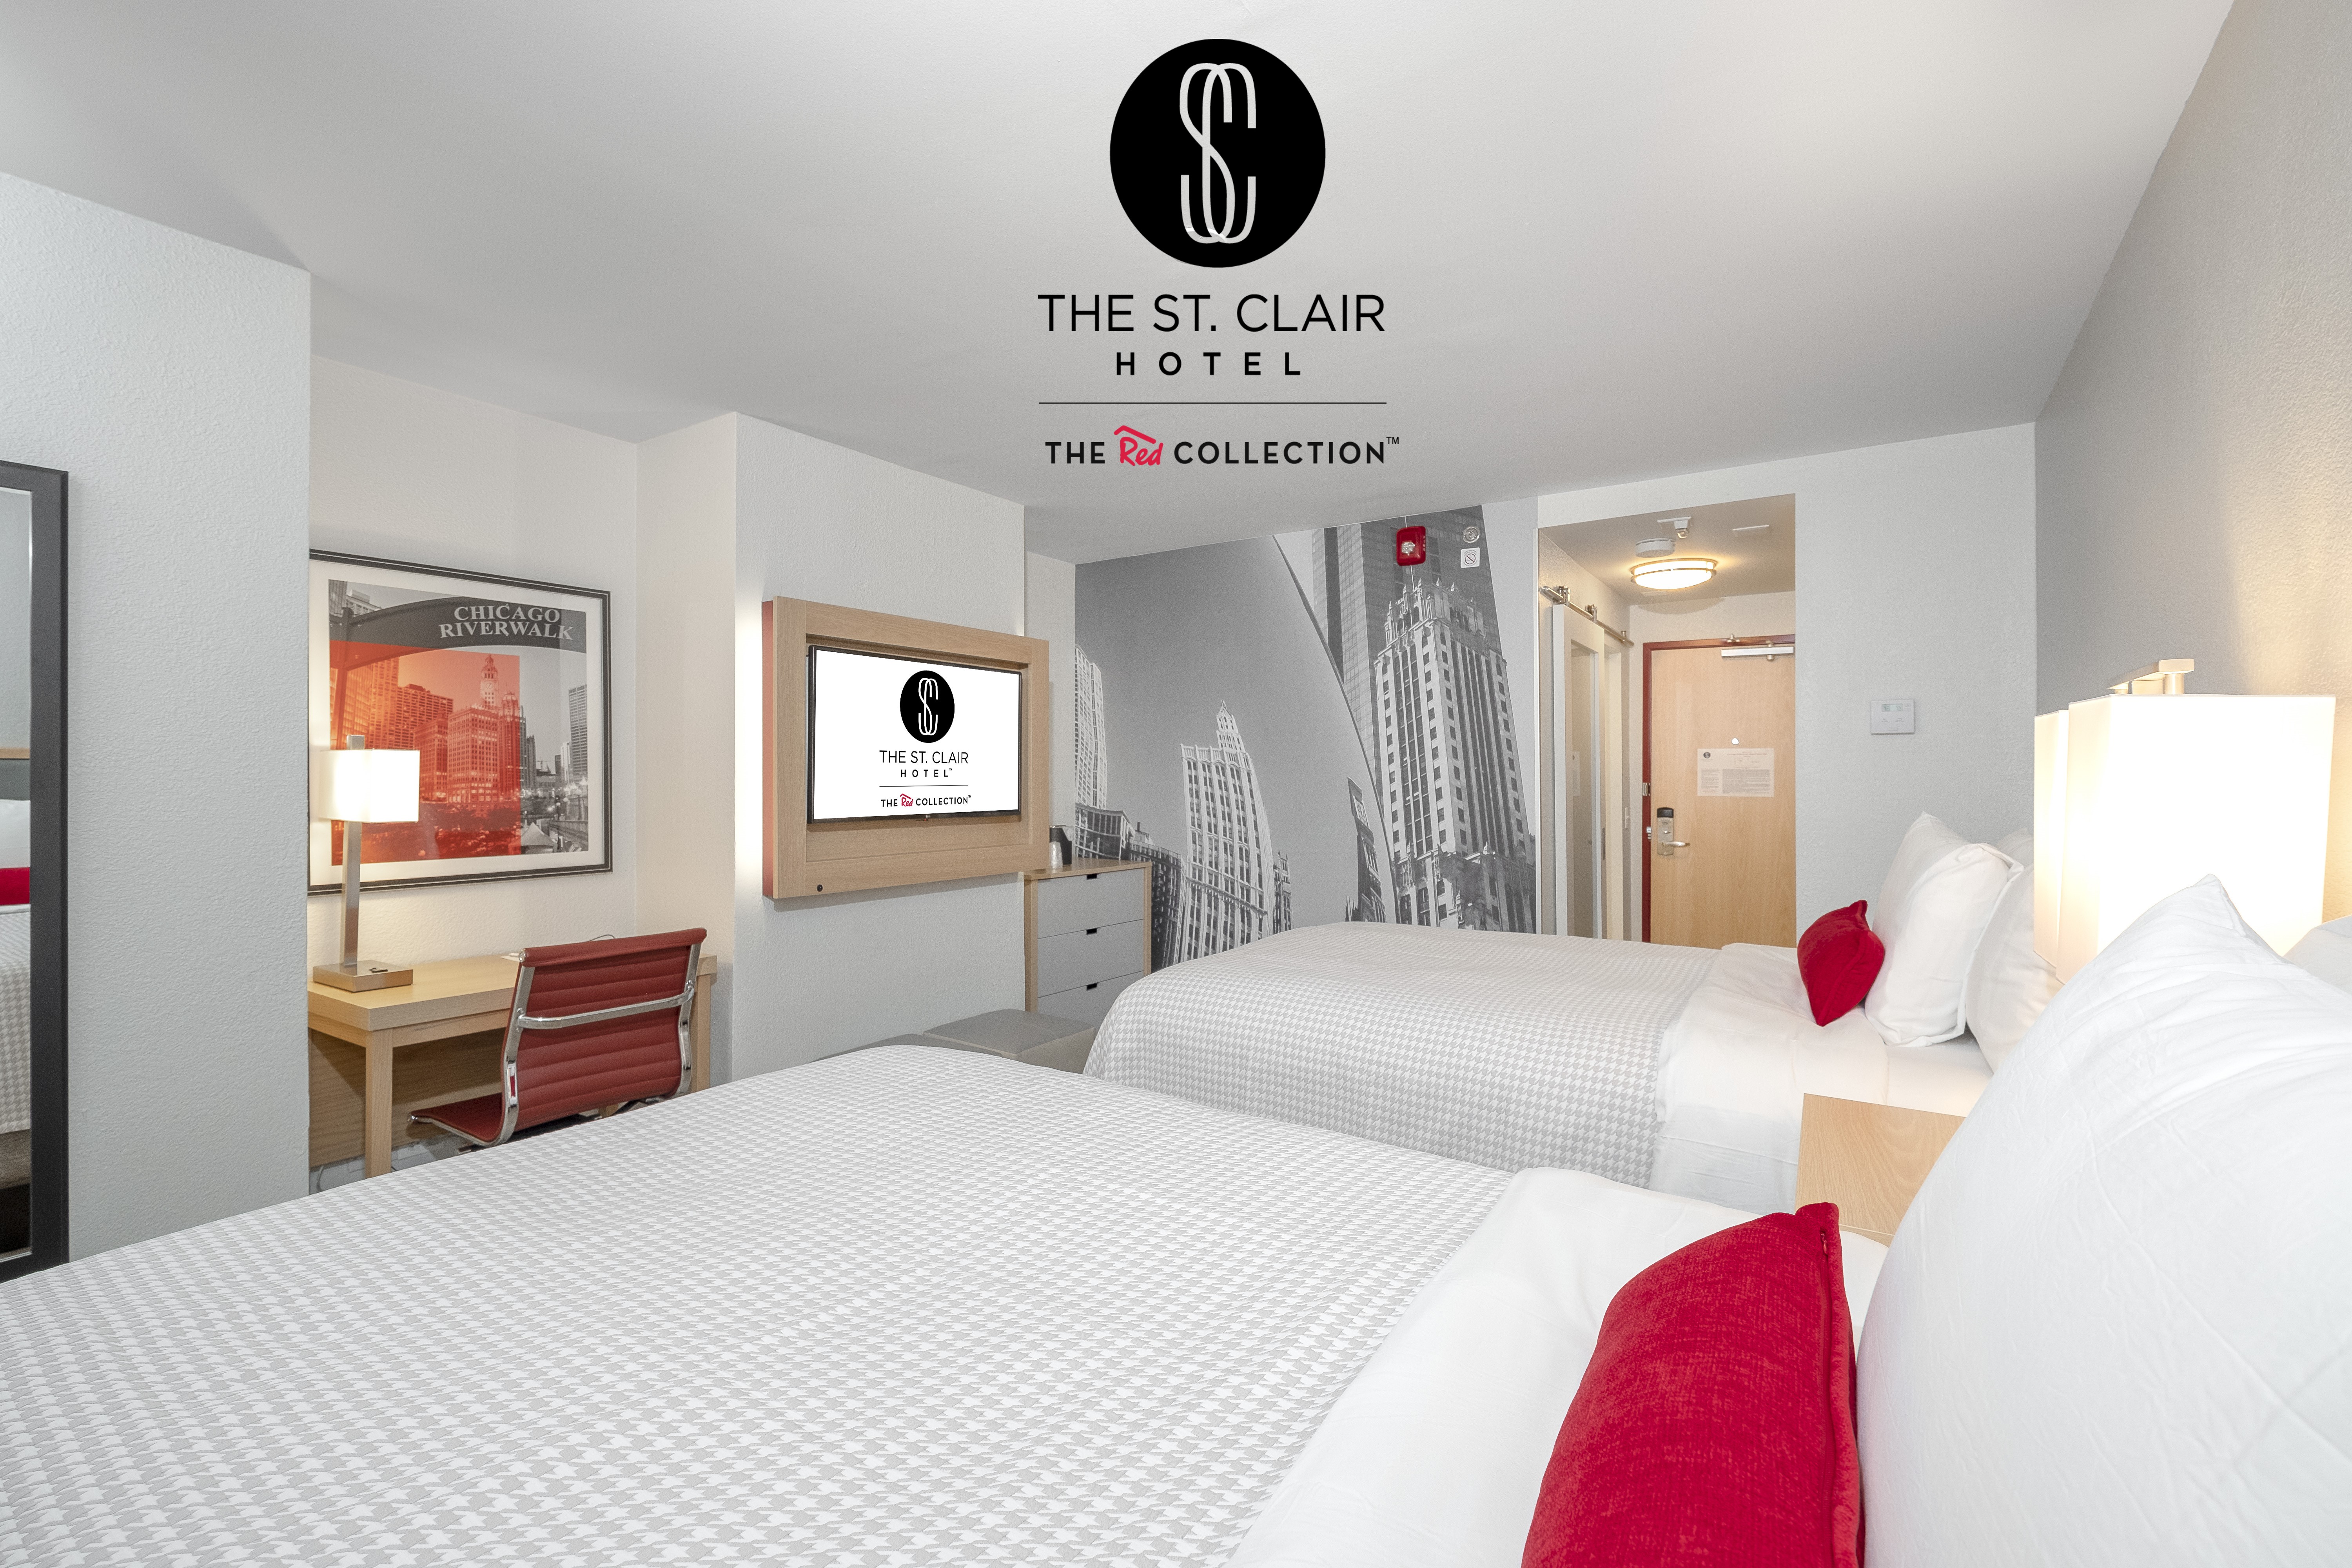 The St. Clair Hotel - Magnificent Mile Chicago (312)787-3580